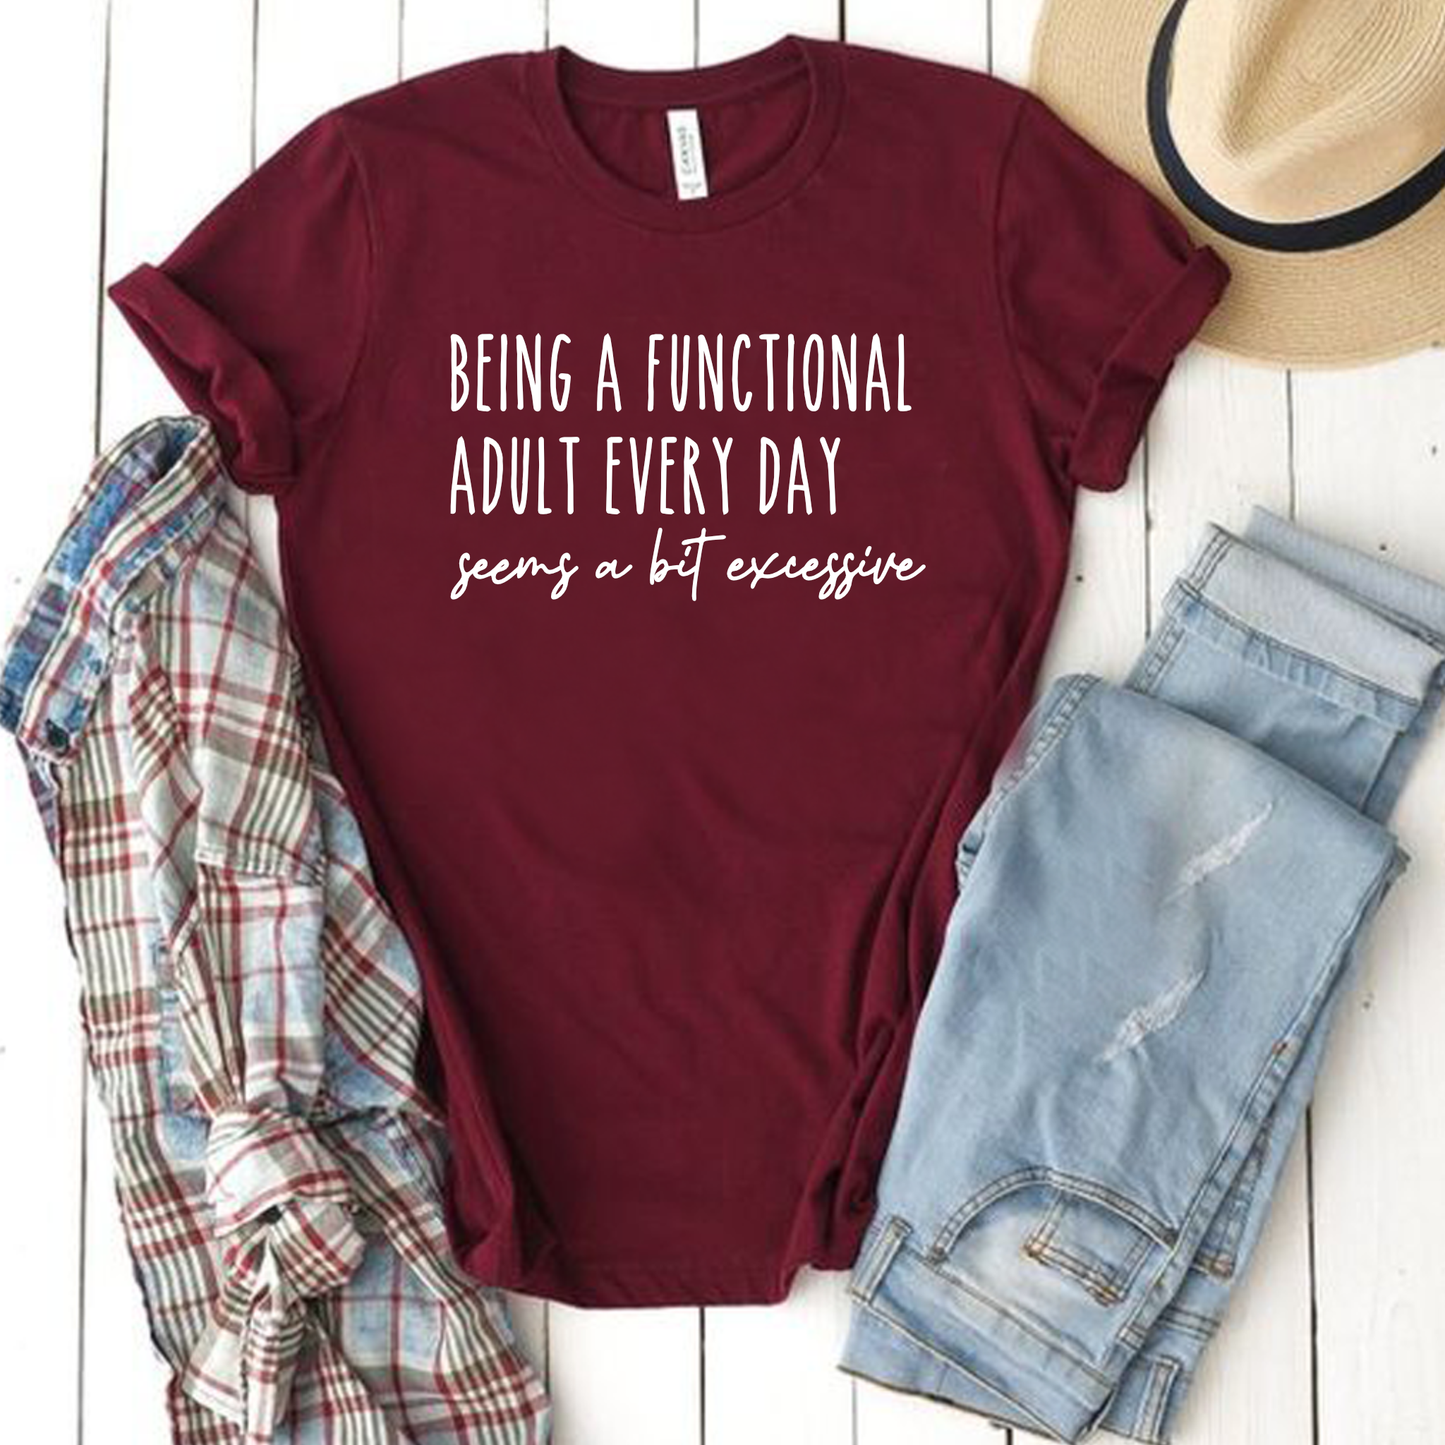 Being a Functional Adult Every Day Seems a Bit Excessive Funny Tee